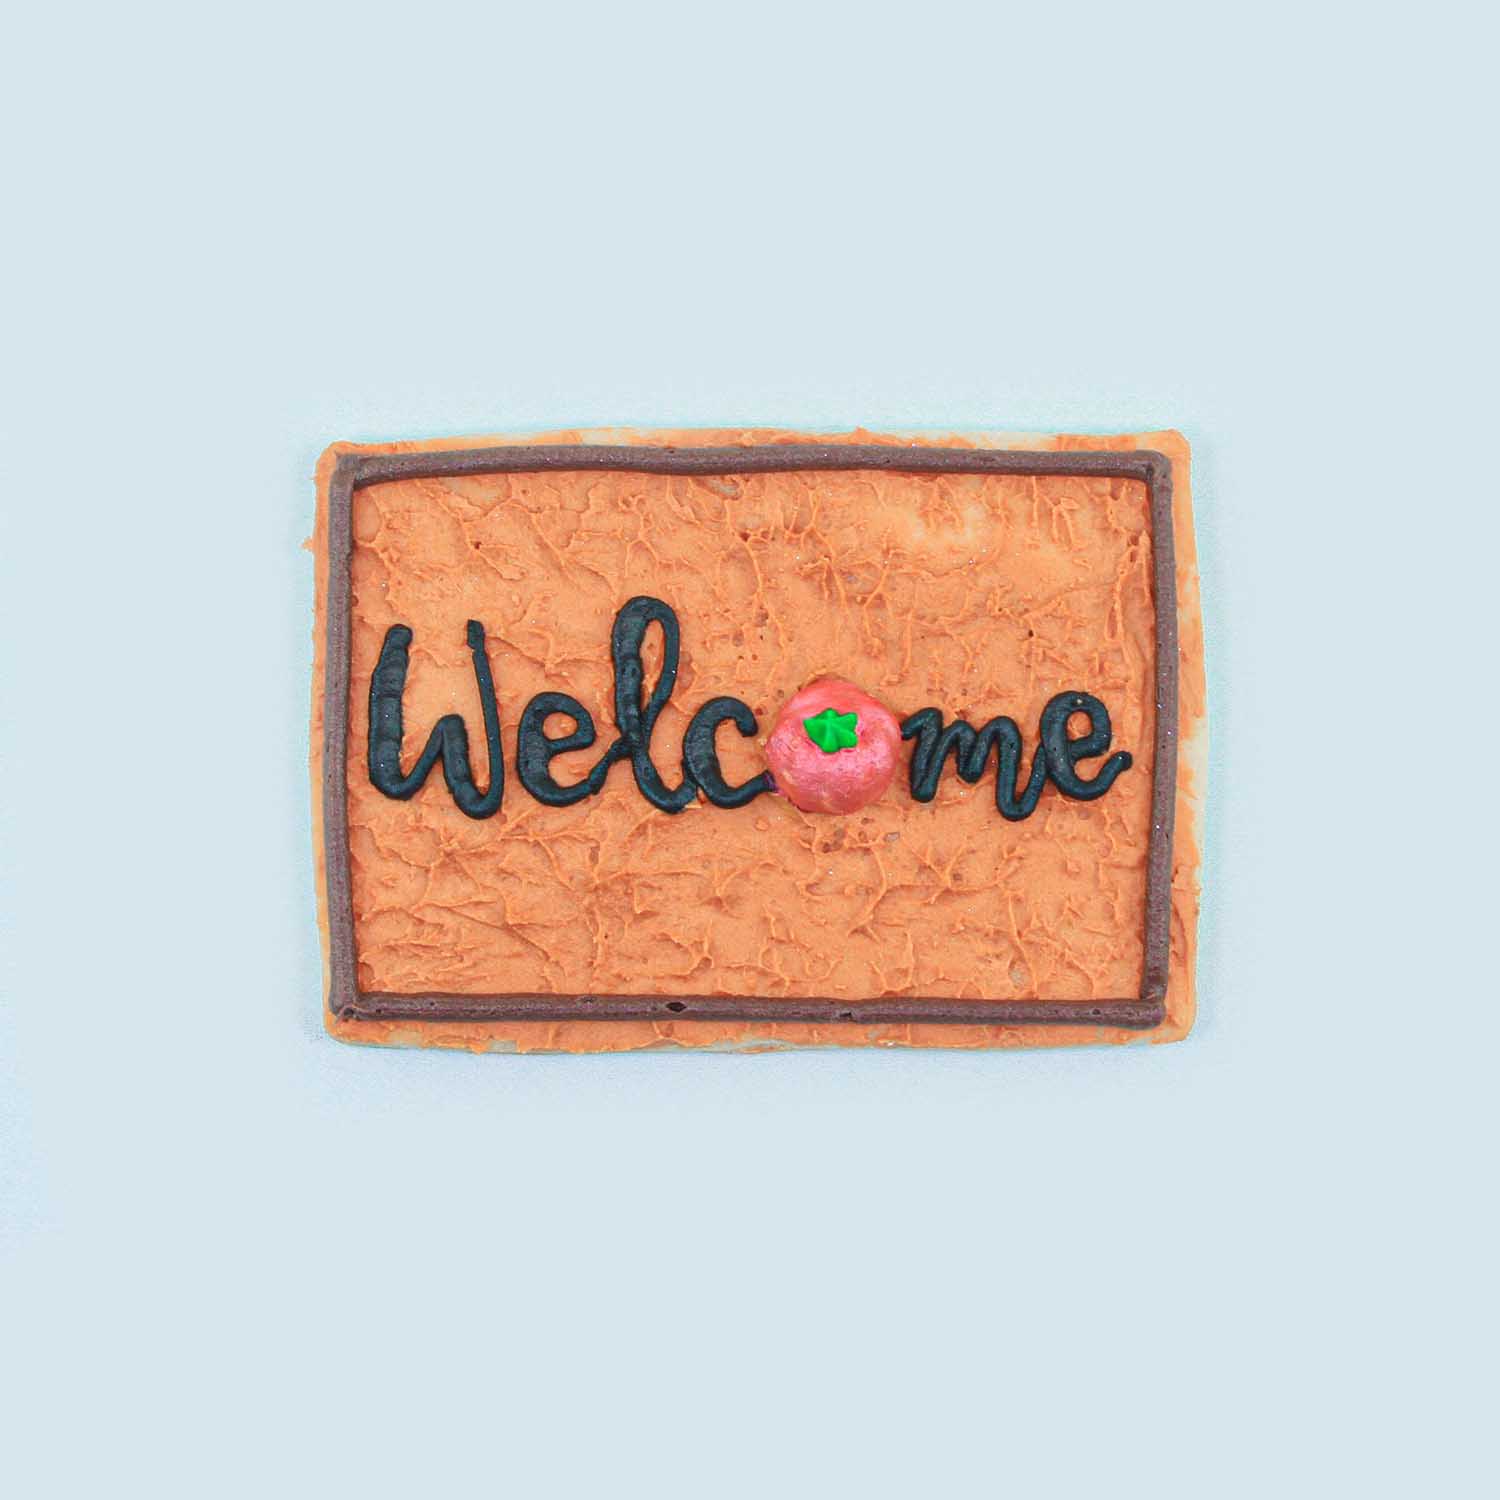 Rectangle cookie decorated in buttercream to look like a welcome mat at your front door.  Royal icing pumpkin takes place of the "o" in welcome.